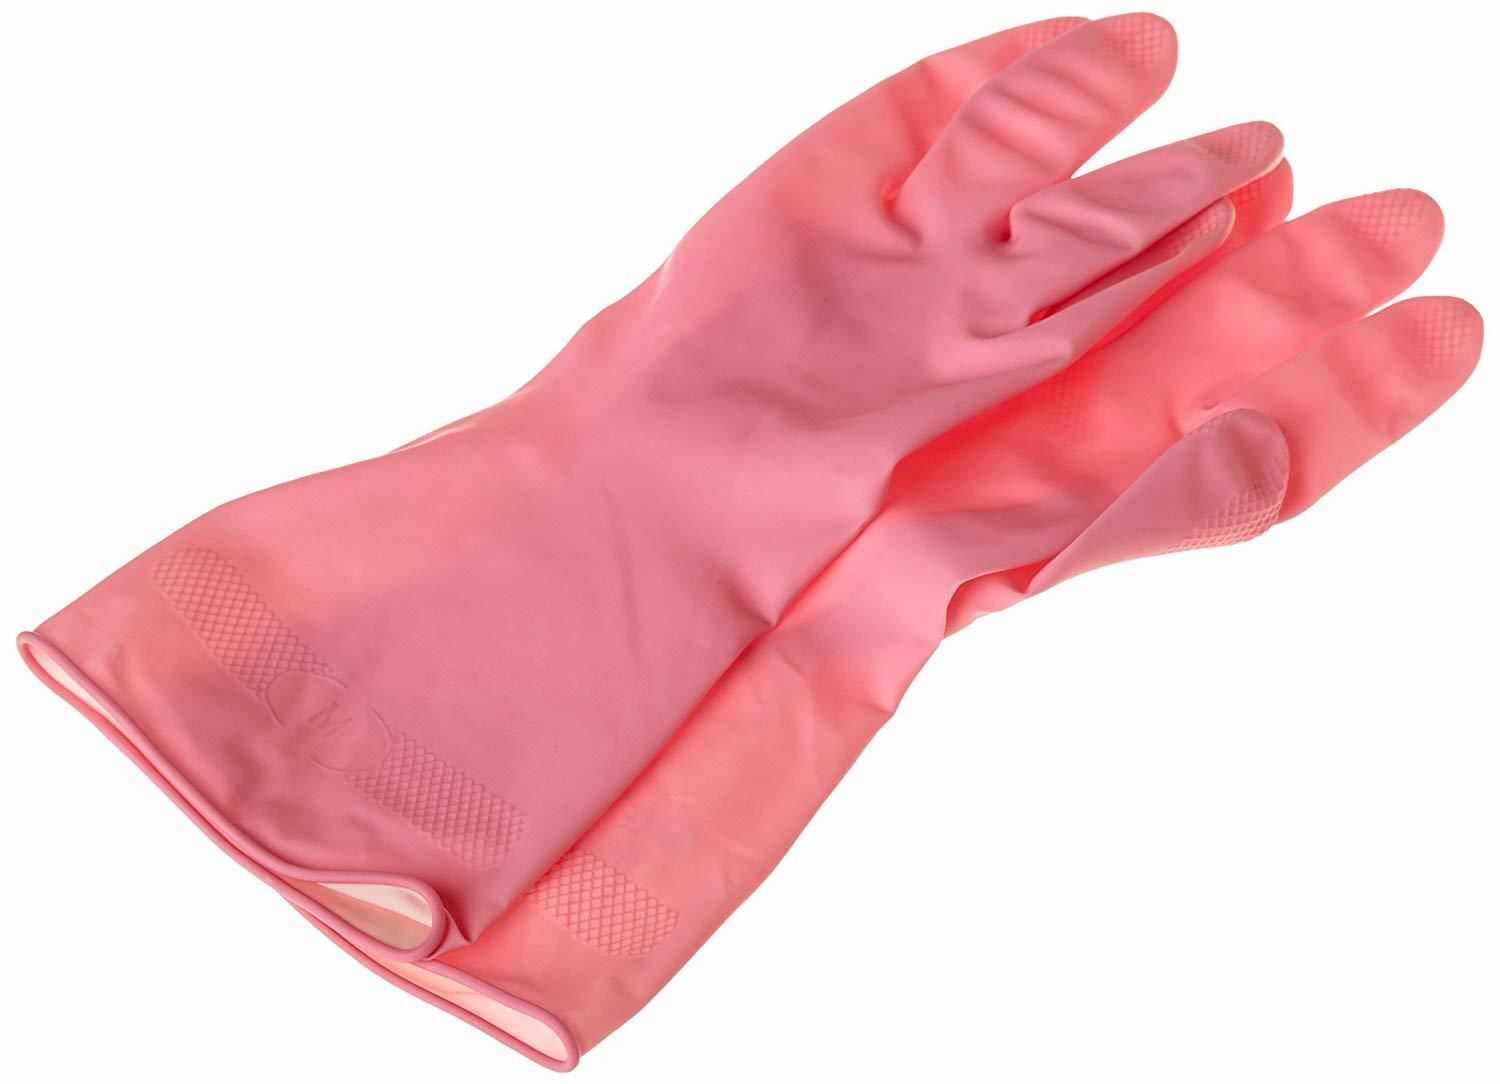 Cumfies RUBBER GLOVES SMALL MEDIUM OR LARGE 